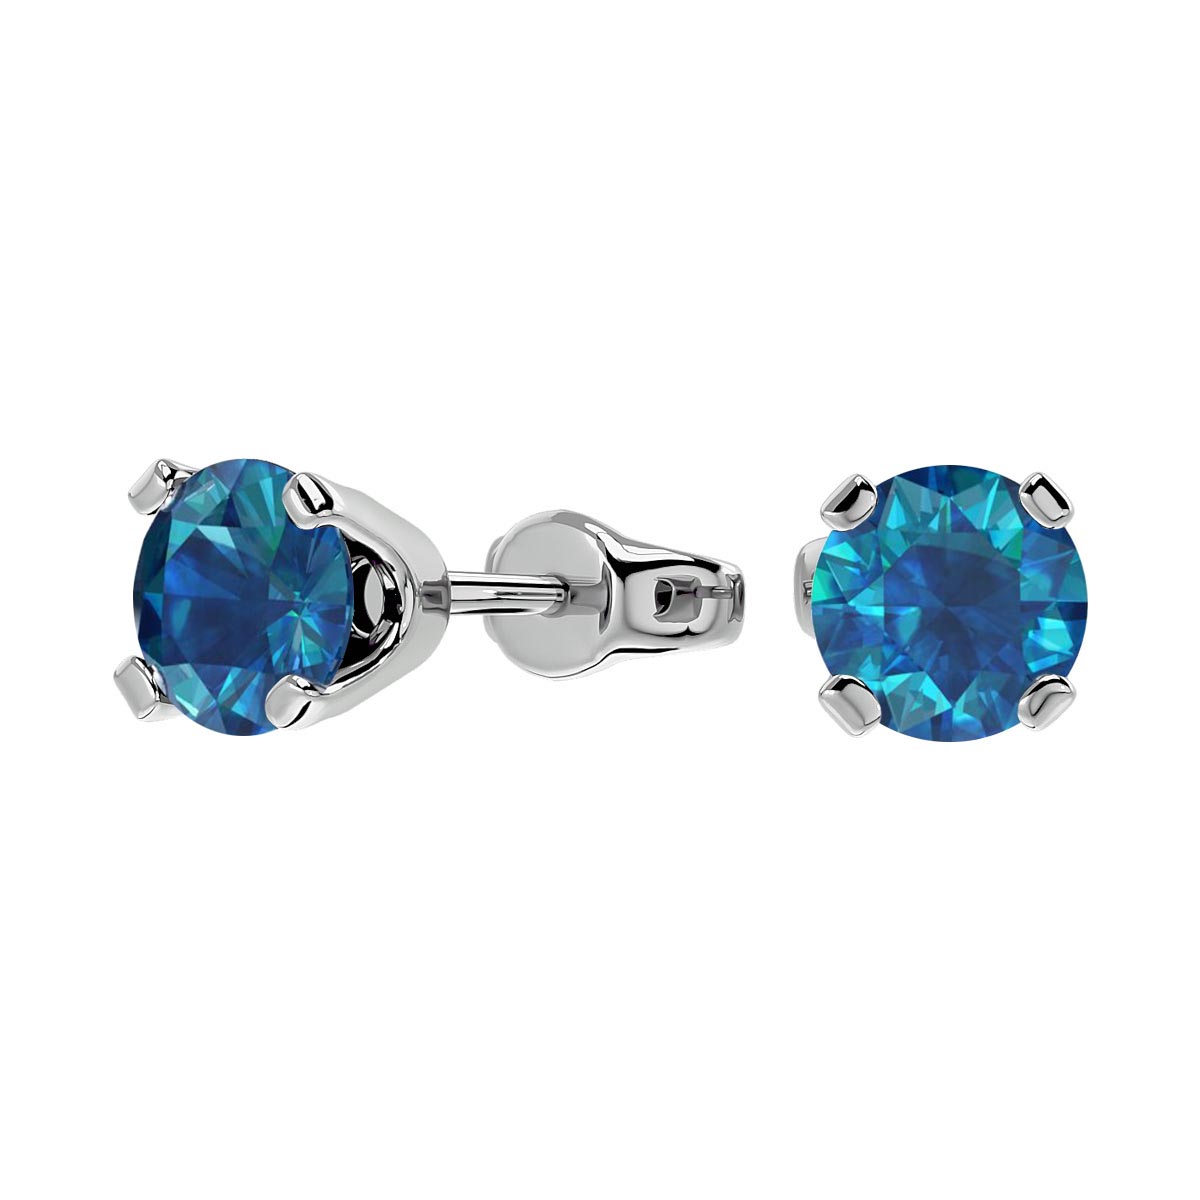 Update more than 77 natural blue diamond stud earrings latest ...